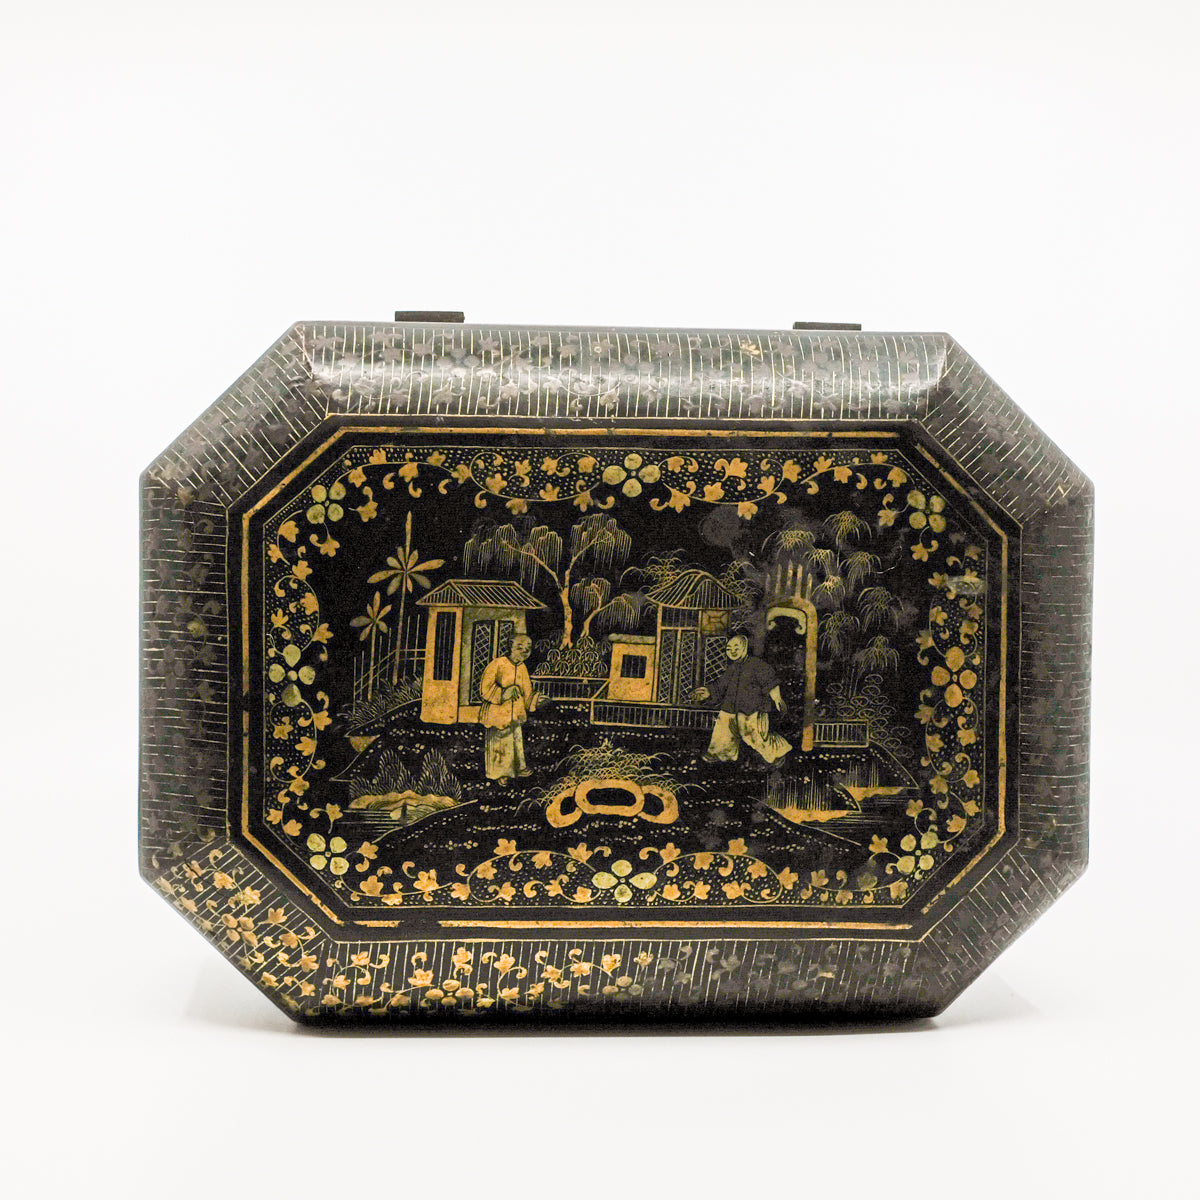 gold and black chinoiserie scene on top of antique papier marche box